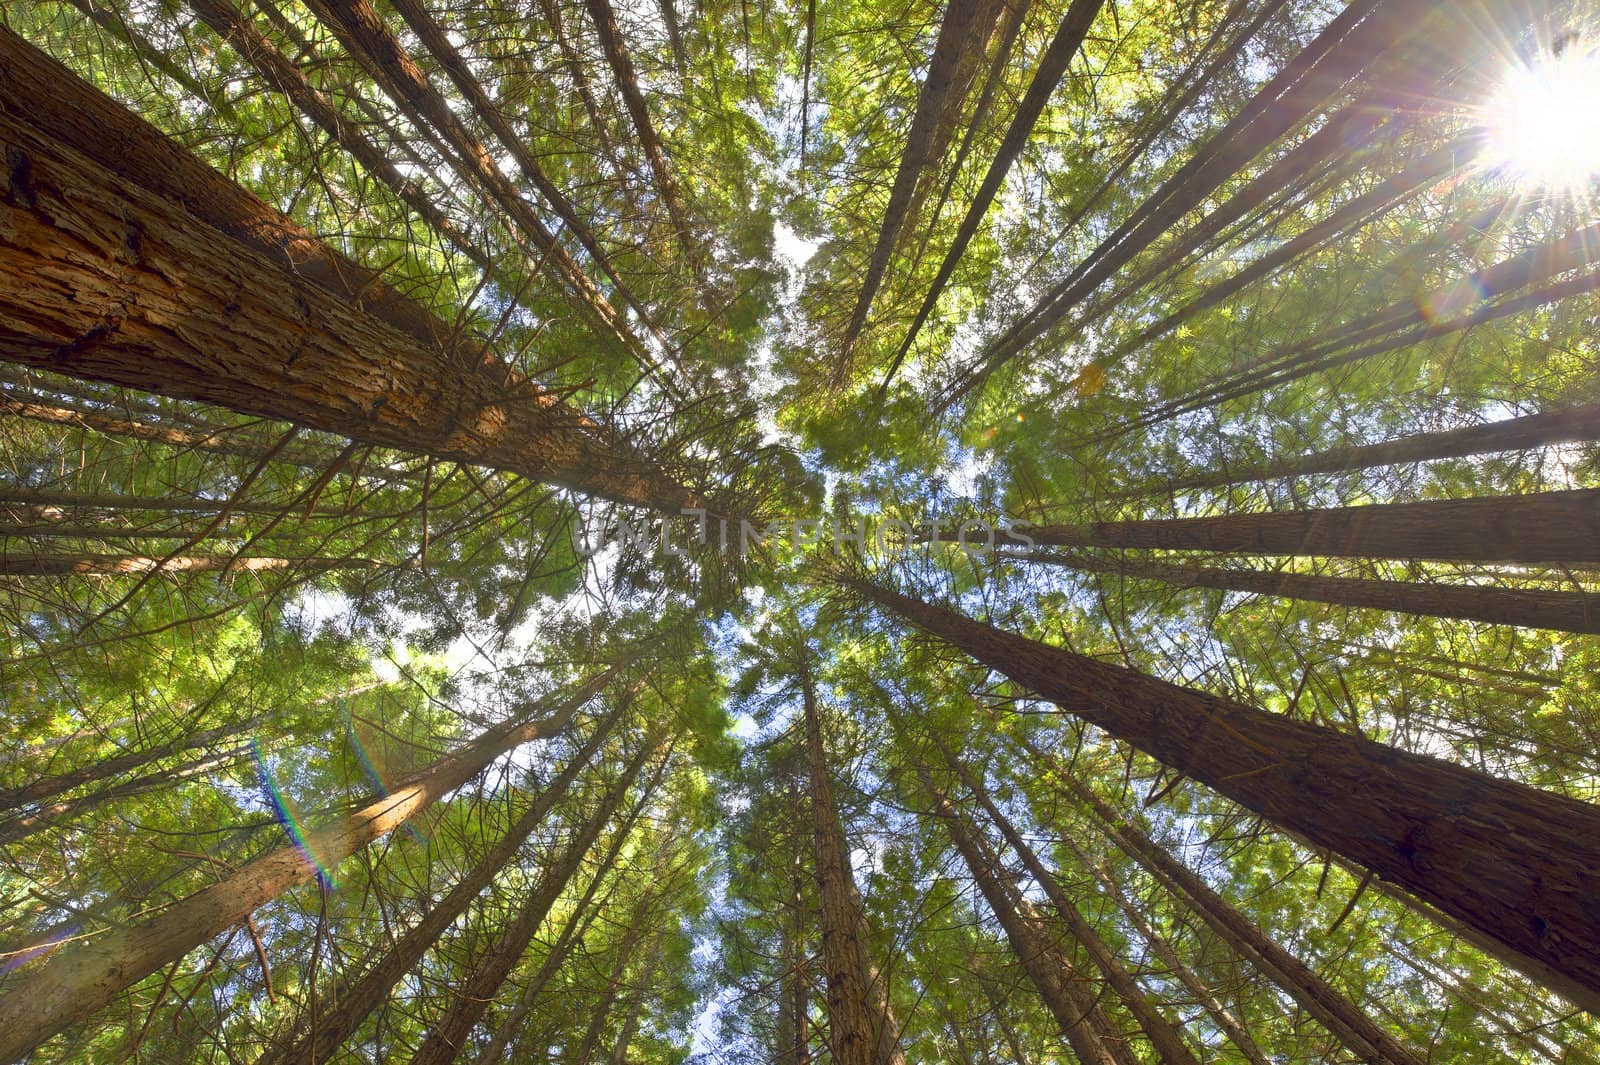 View on the canopy of the Redwoods in Whakarewarewa Forest, New Zealand.